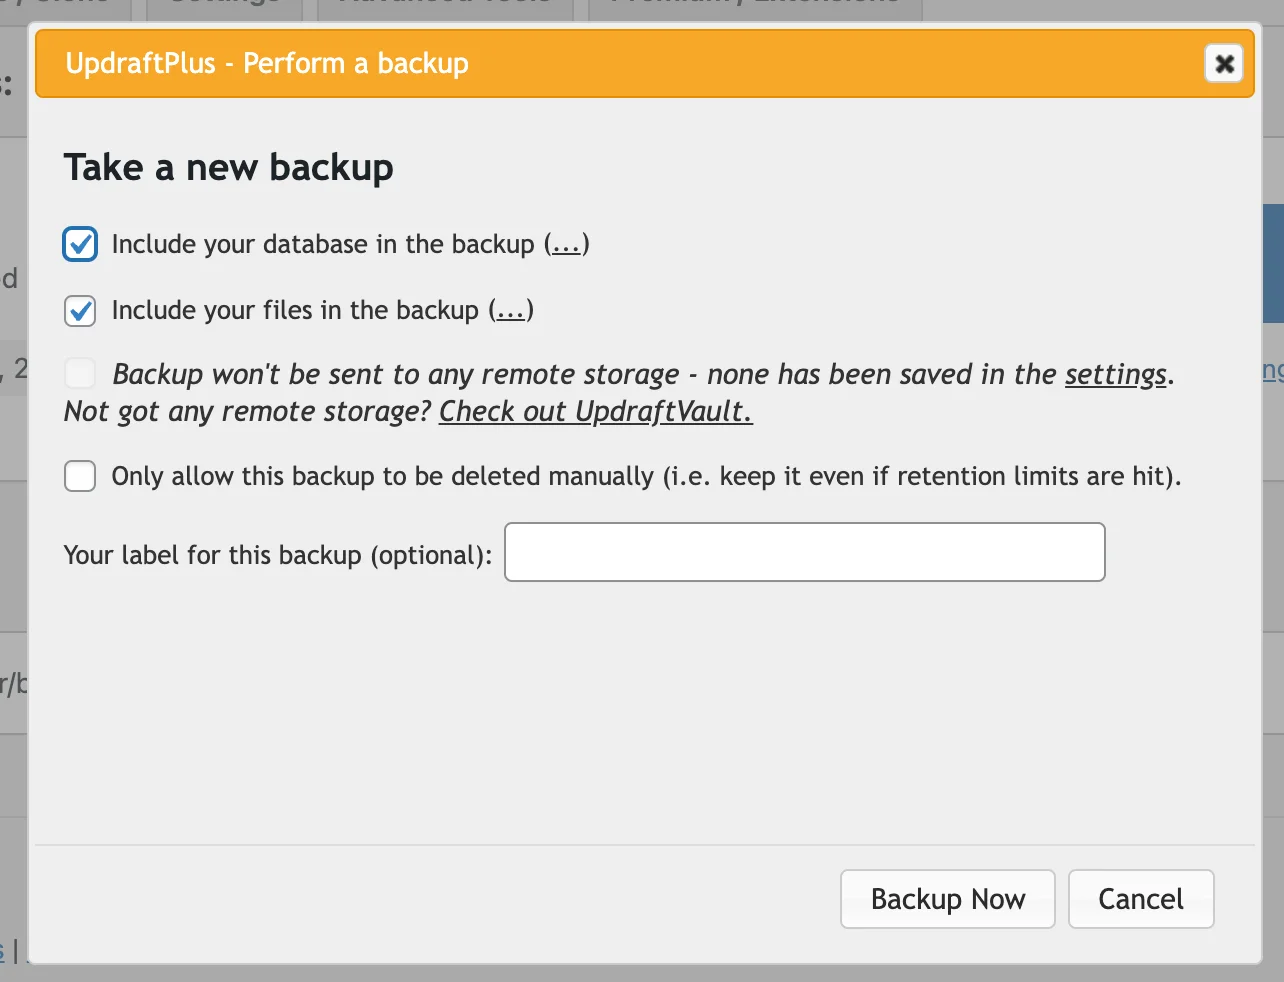 popup-to-select-which-files-to-include-in-the-backup